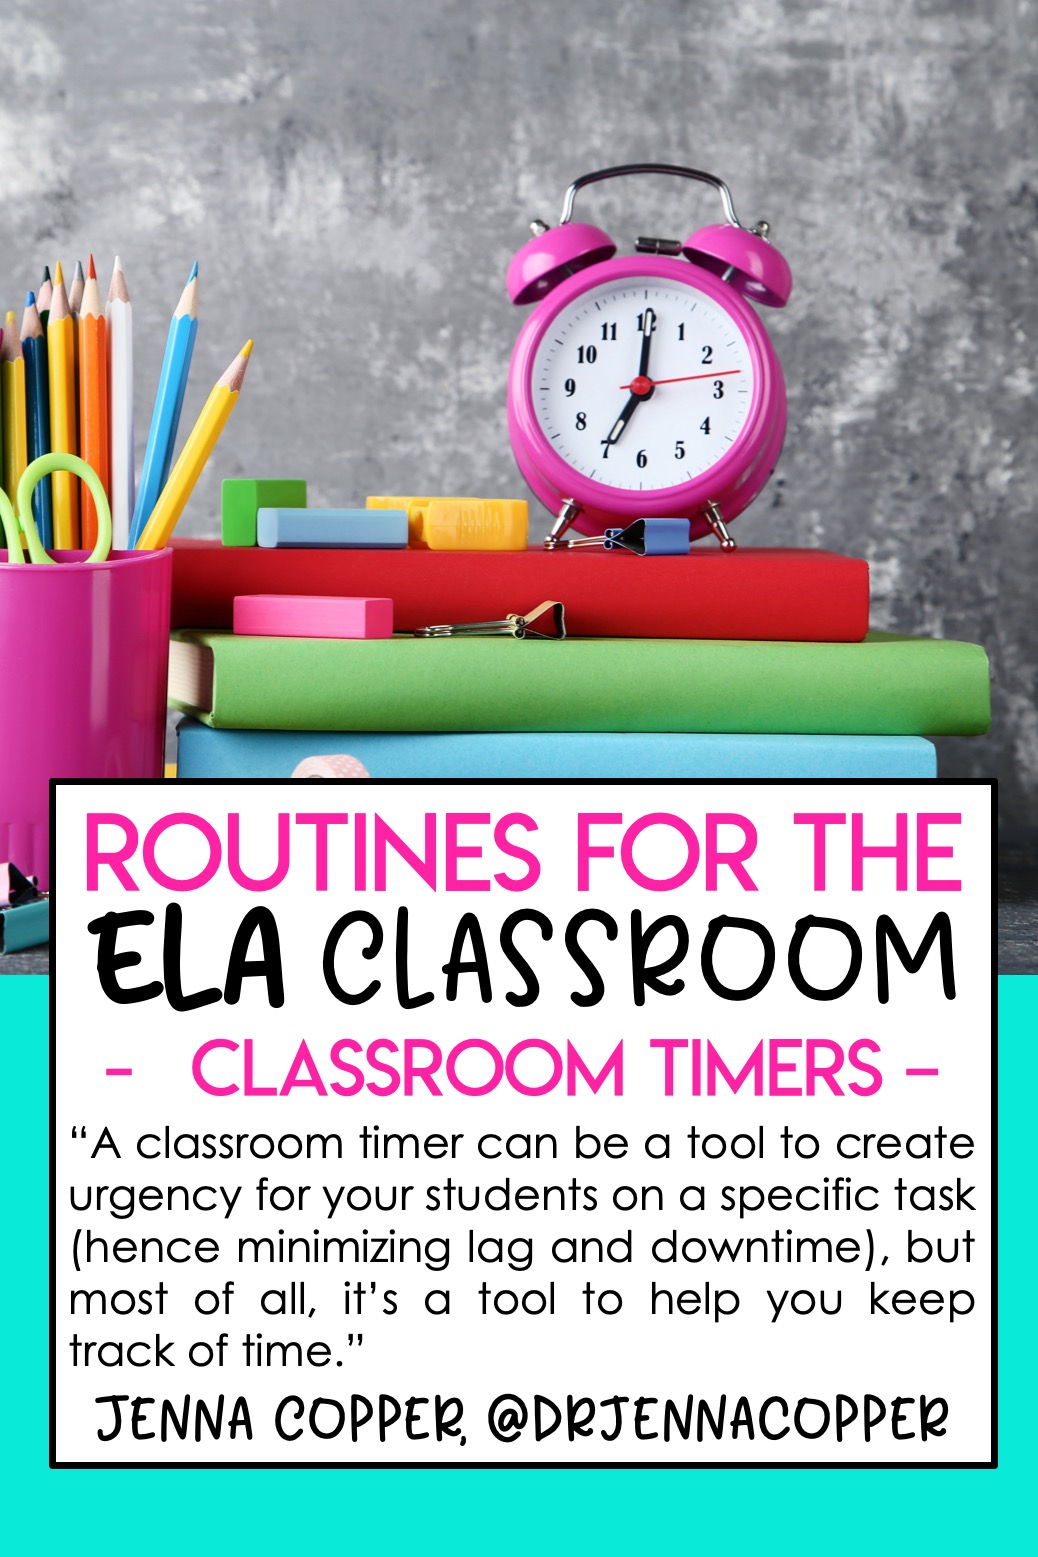 12 Classroom Routines to Try in the Secondary ELA Classroom